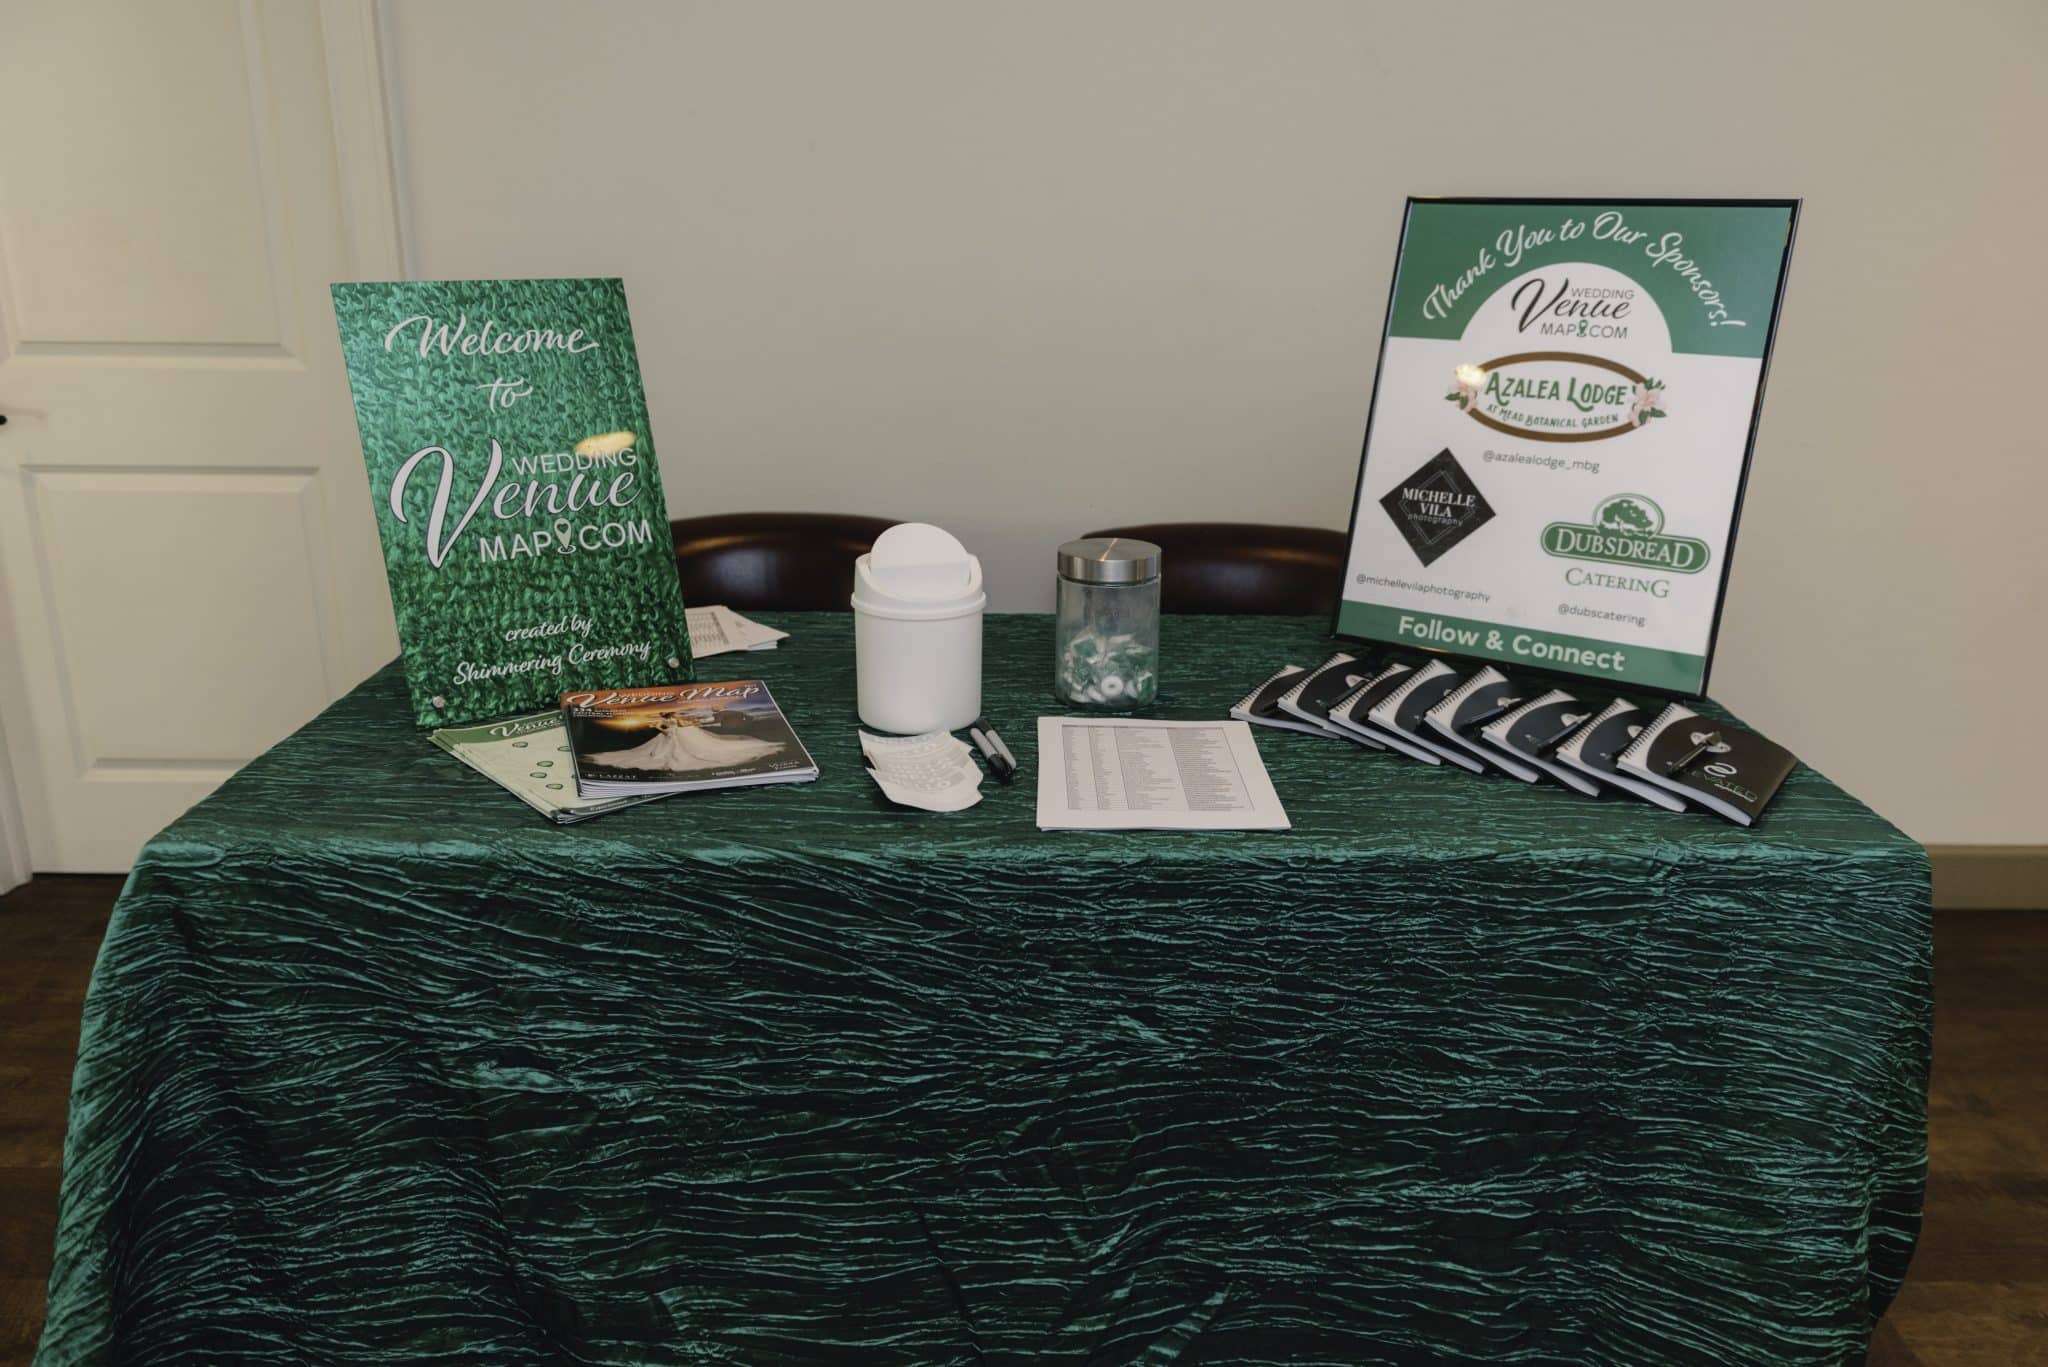 table with green linen on it and two signs standing on top of the table with other registration items like notebooks